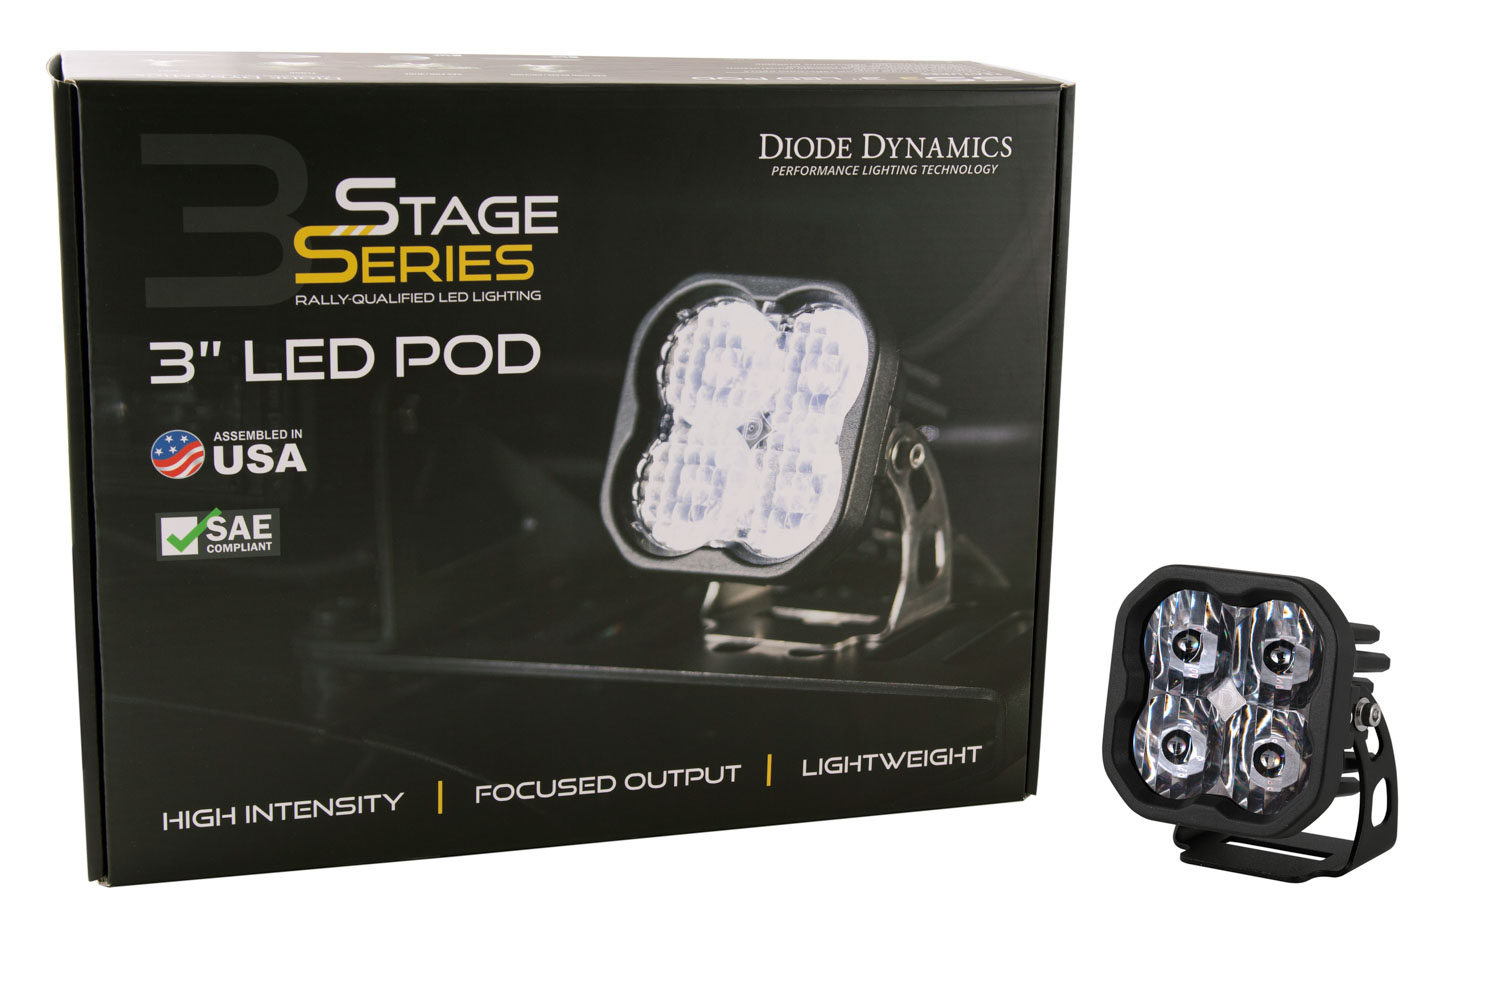 Picture of Diode Dynamics DD6490S Pod Light Featuring Advanced Tir Optics For High Efficiency And Focus.